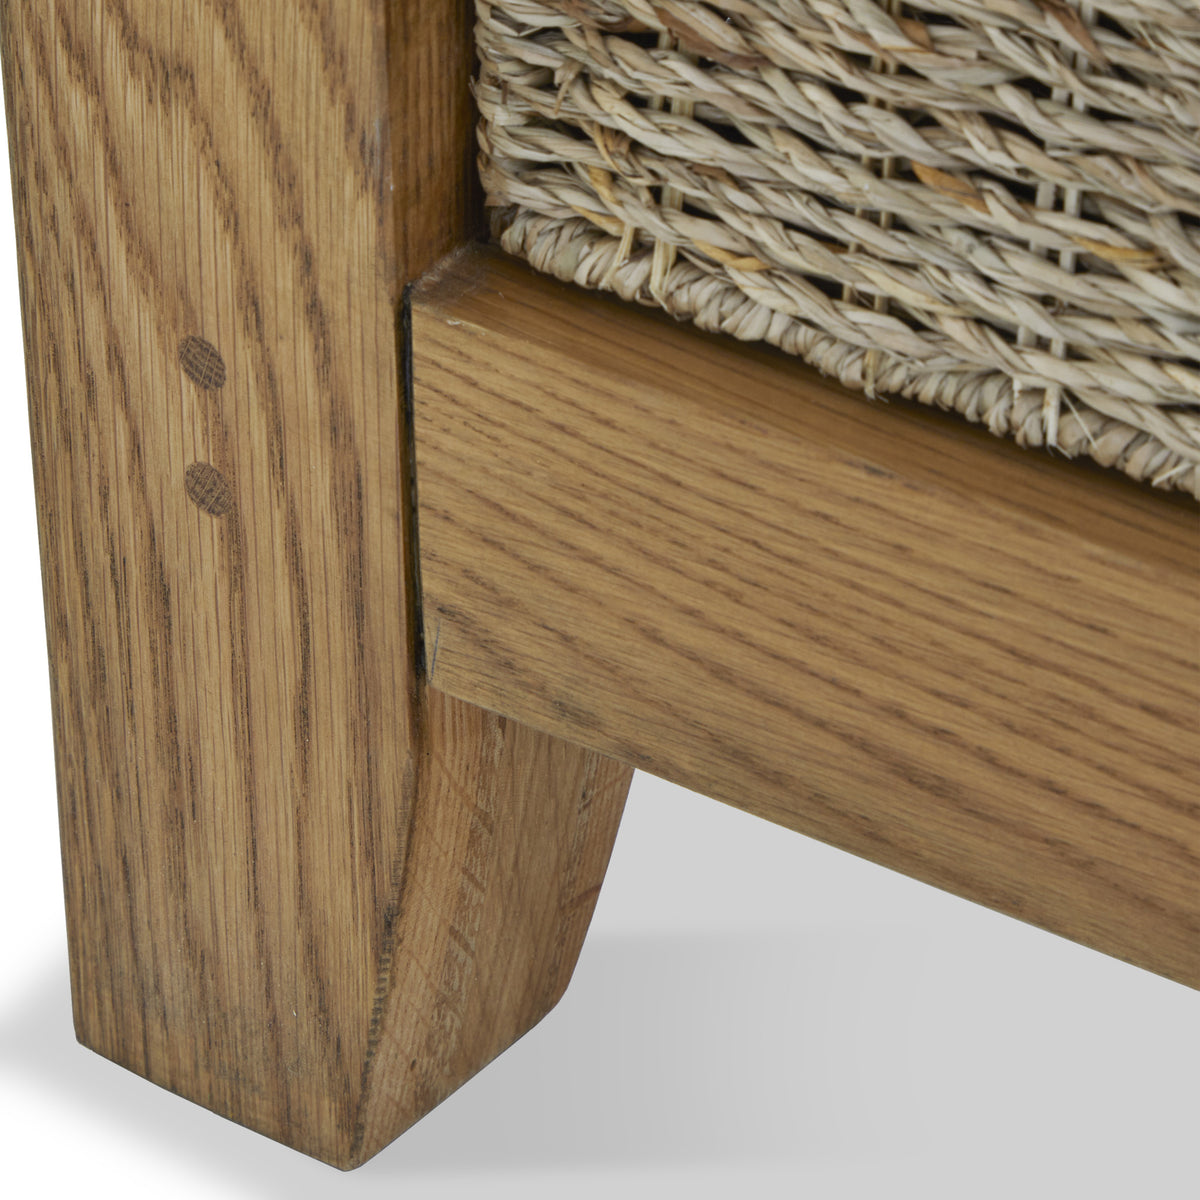 Broadway Oak Console Table with Baskets